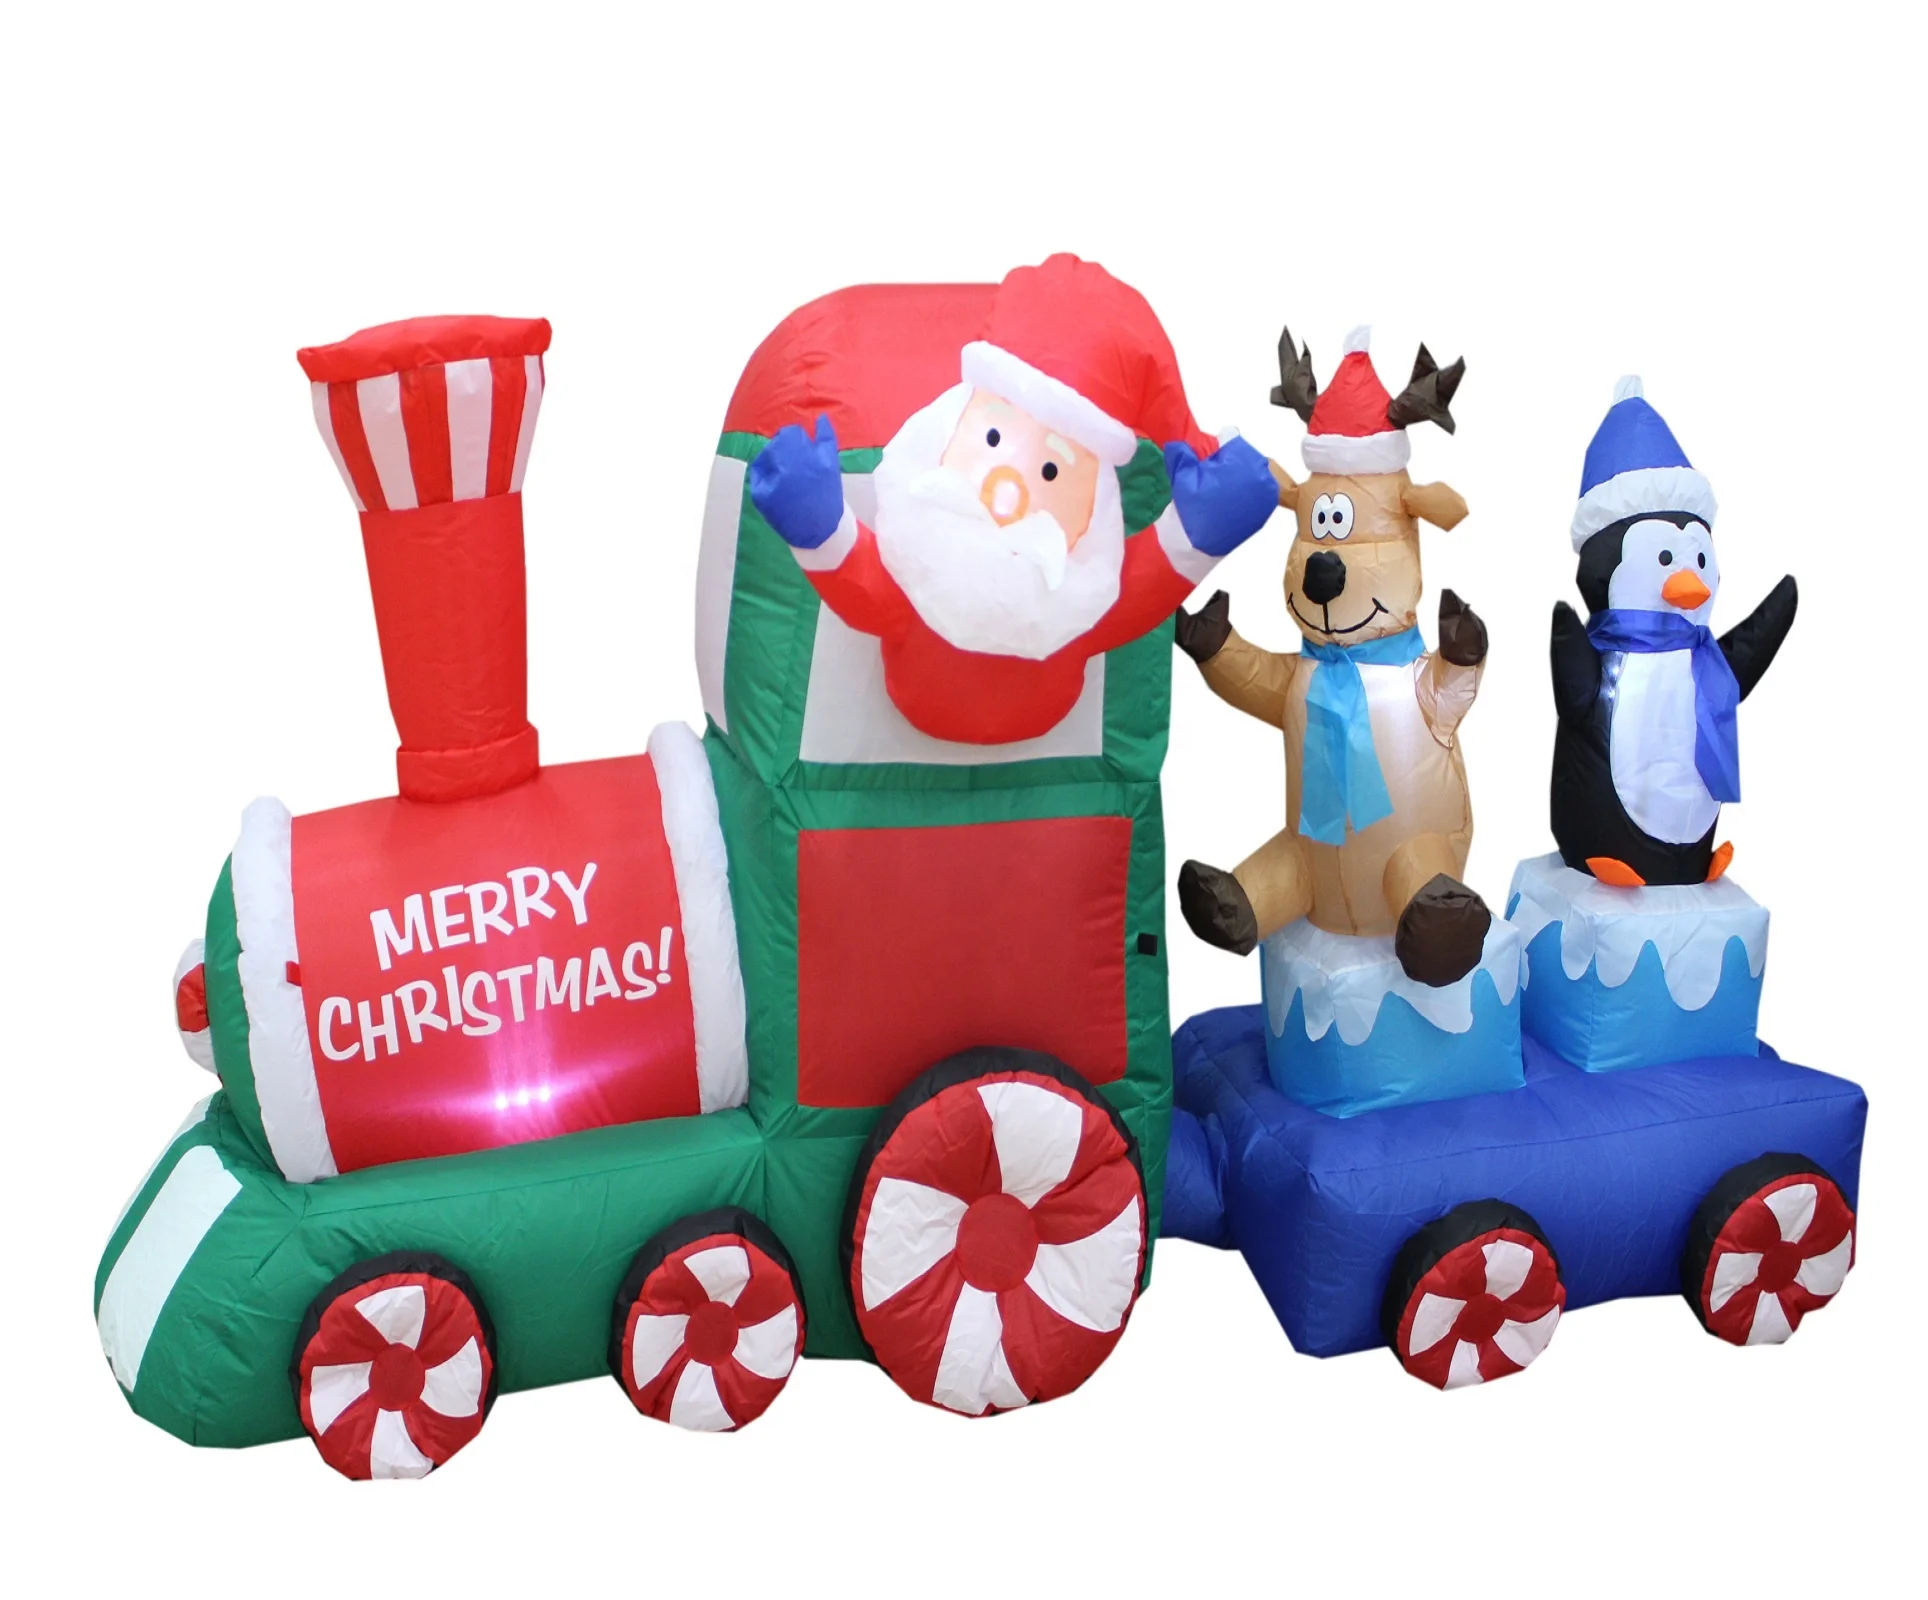 210cm Long Inflatable Santa Claus Drives A Train With Deer And Penguin ...